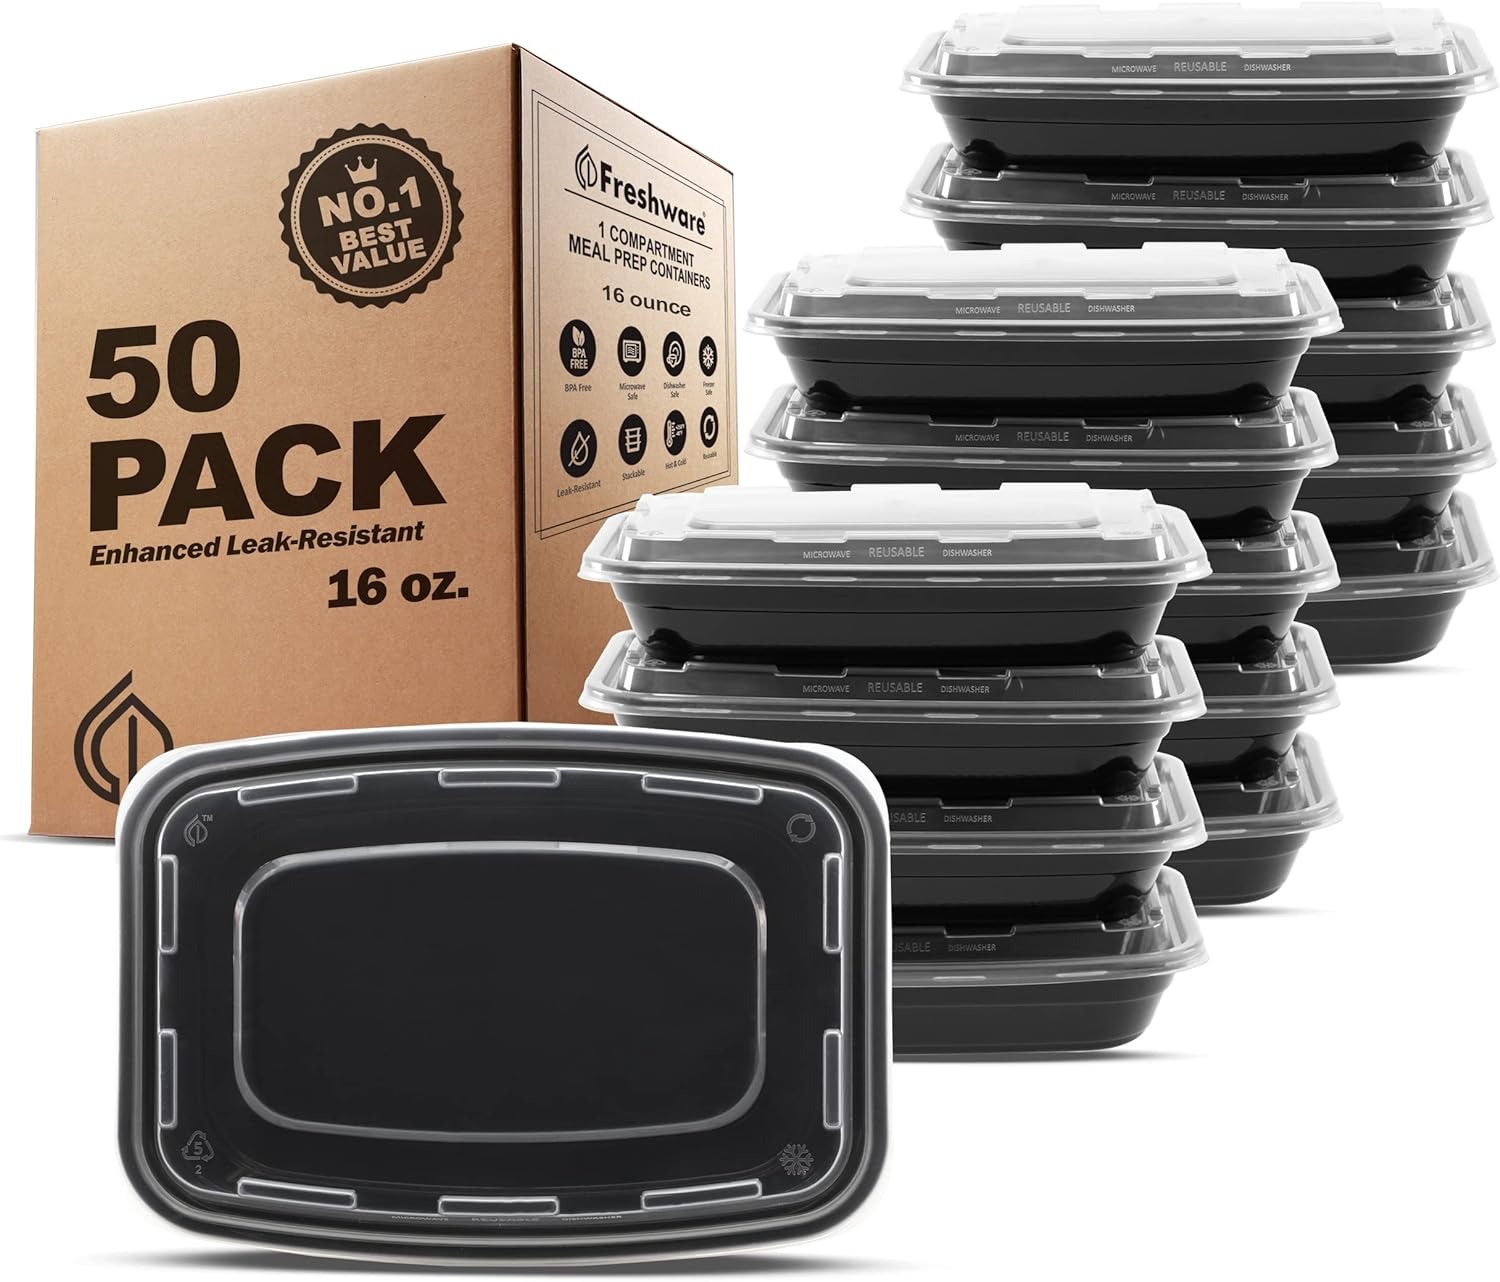 $12.46: 50-Pack 16oz. Freshware Meal Prep Containers 1 Compartment w/ Lids